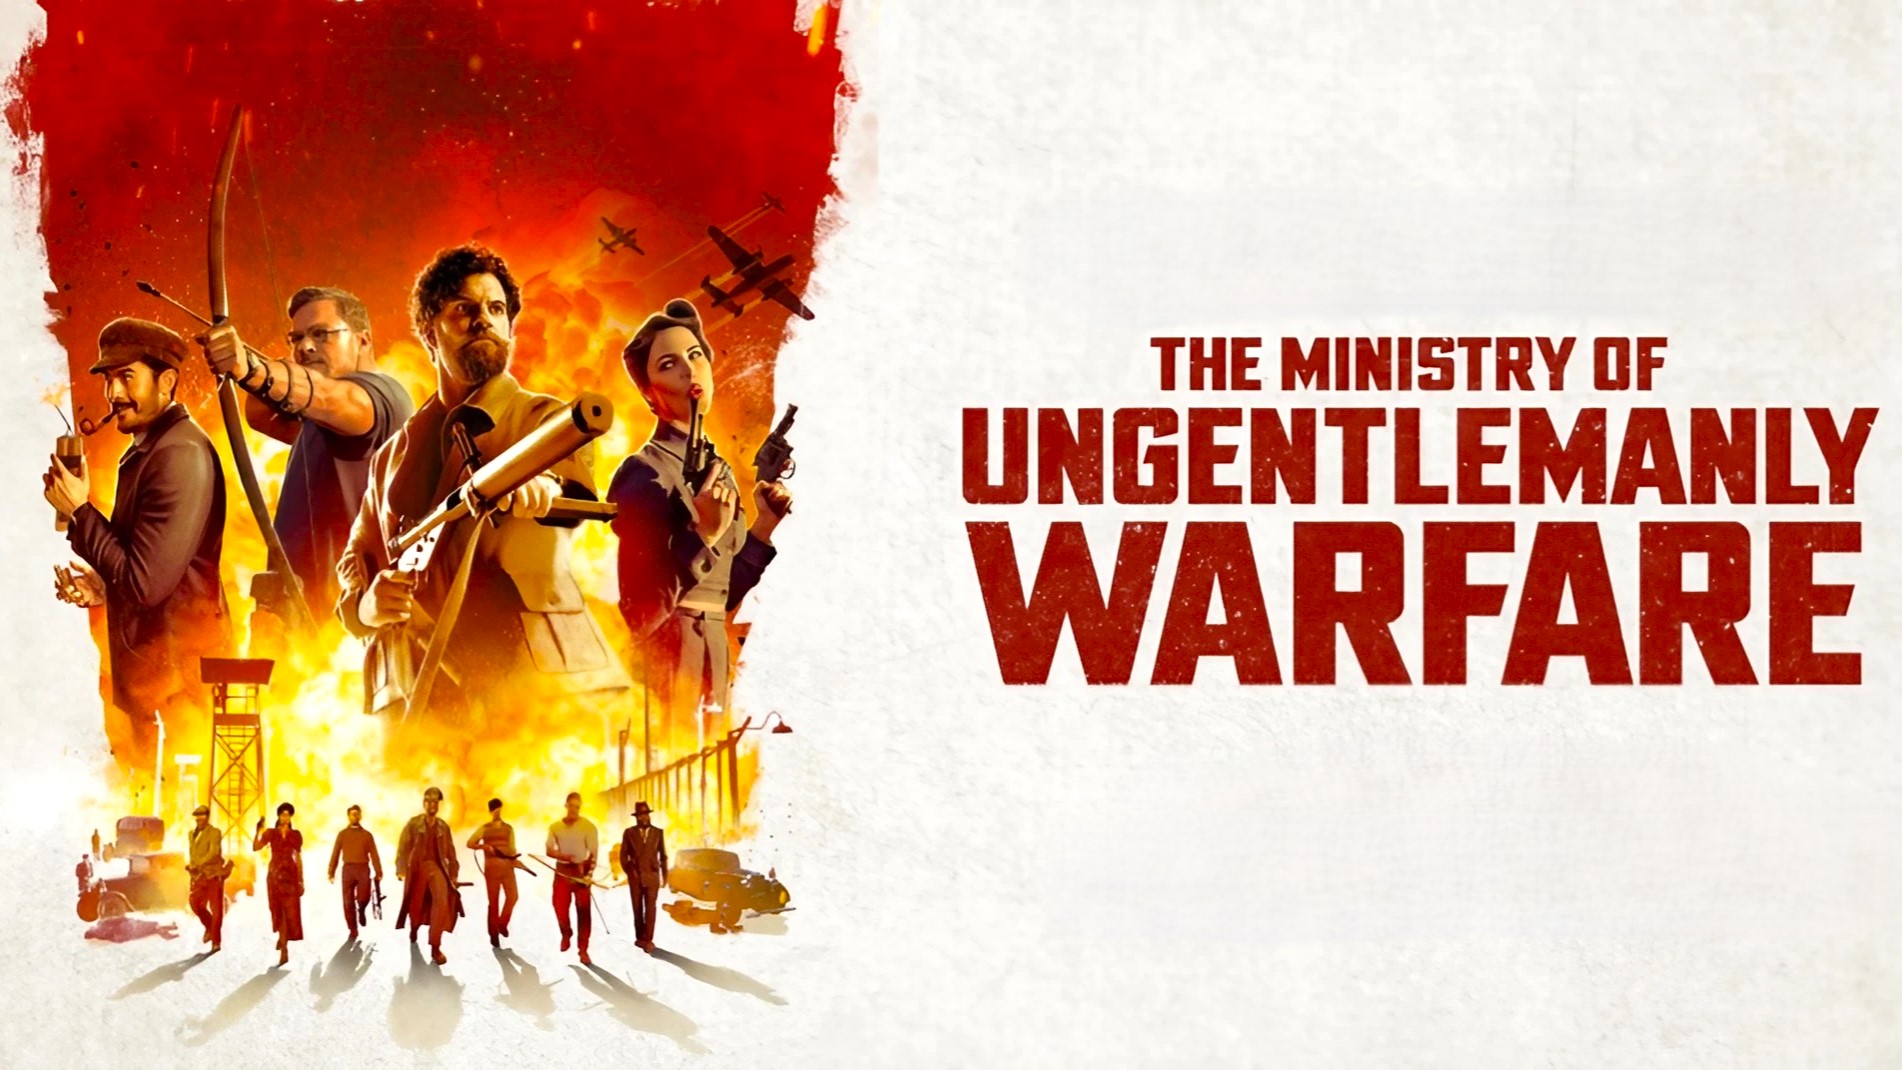 is The Ministry of Ungentlemanly Warfare based on a true story